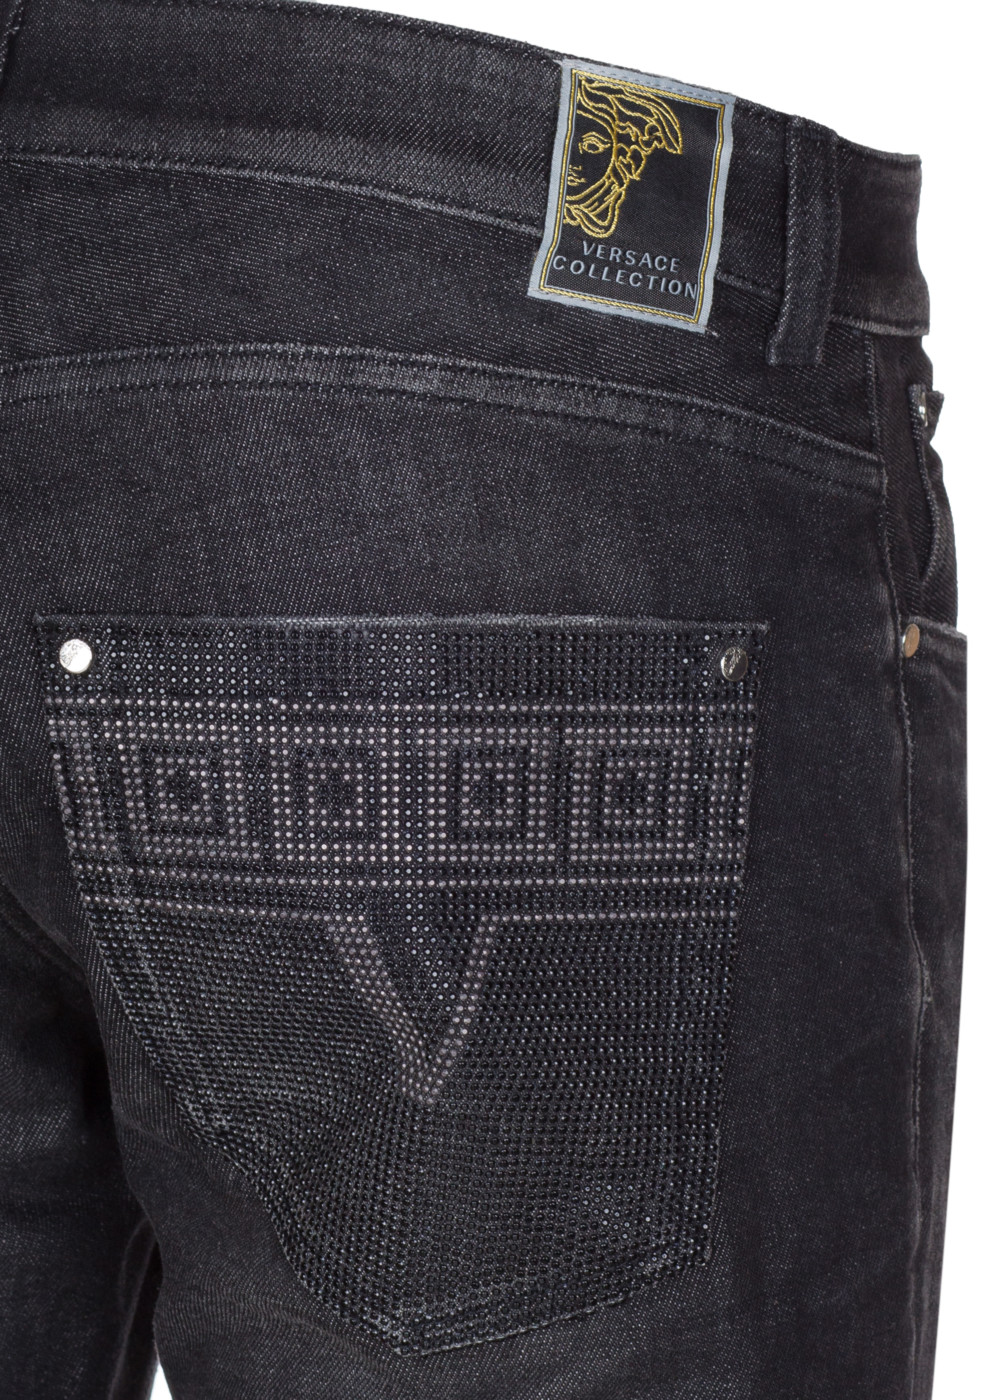 woocommerce-673321-2209615.cloudwaysapps.com-versace-collection-mens-black-stretch-cotton-embellished-new-fit-denim-jeans